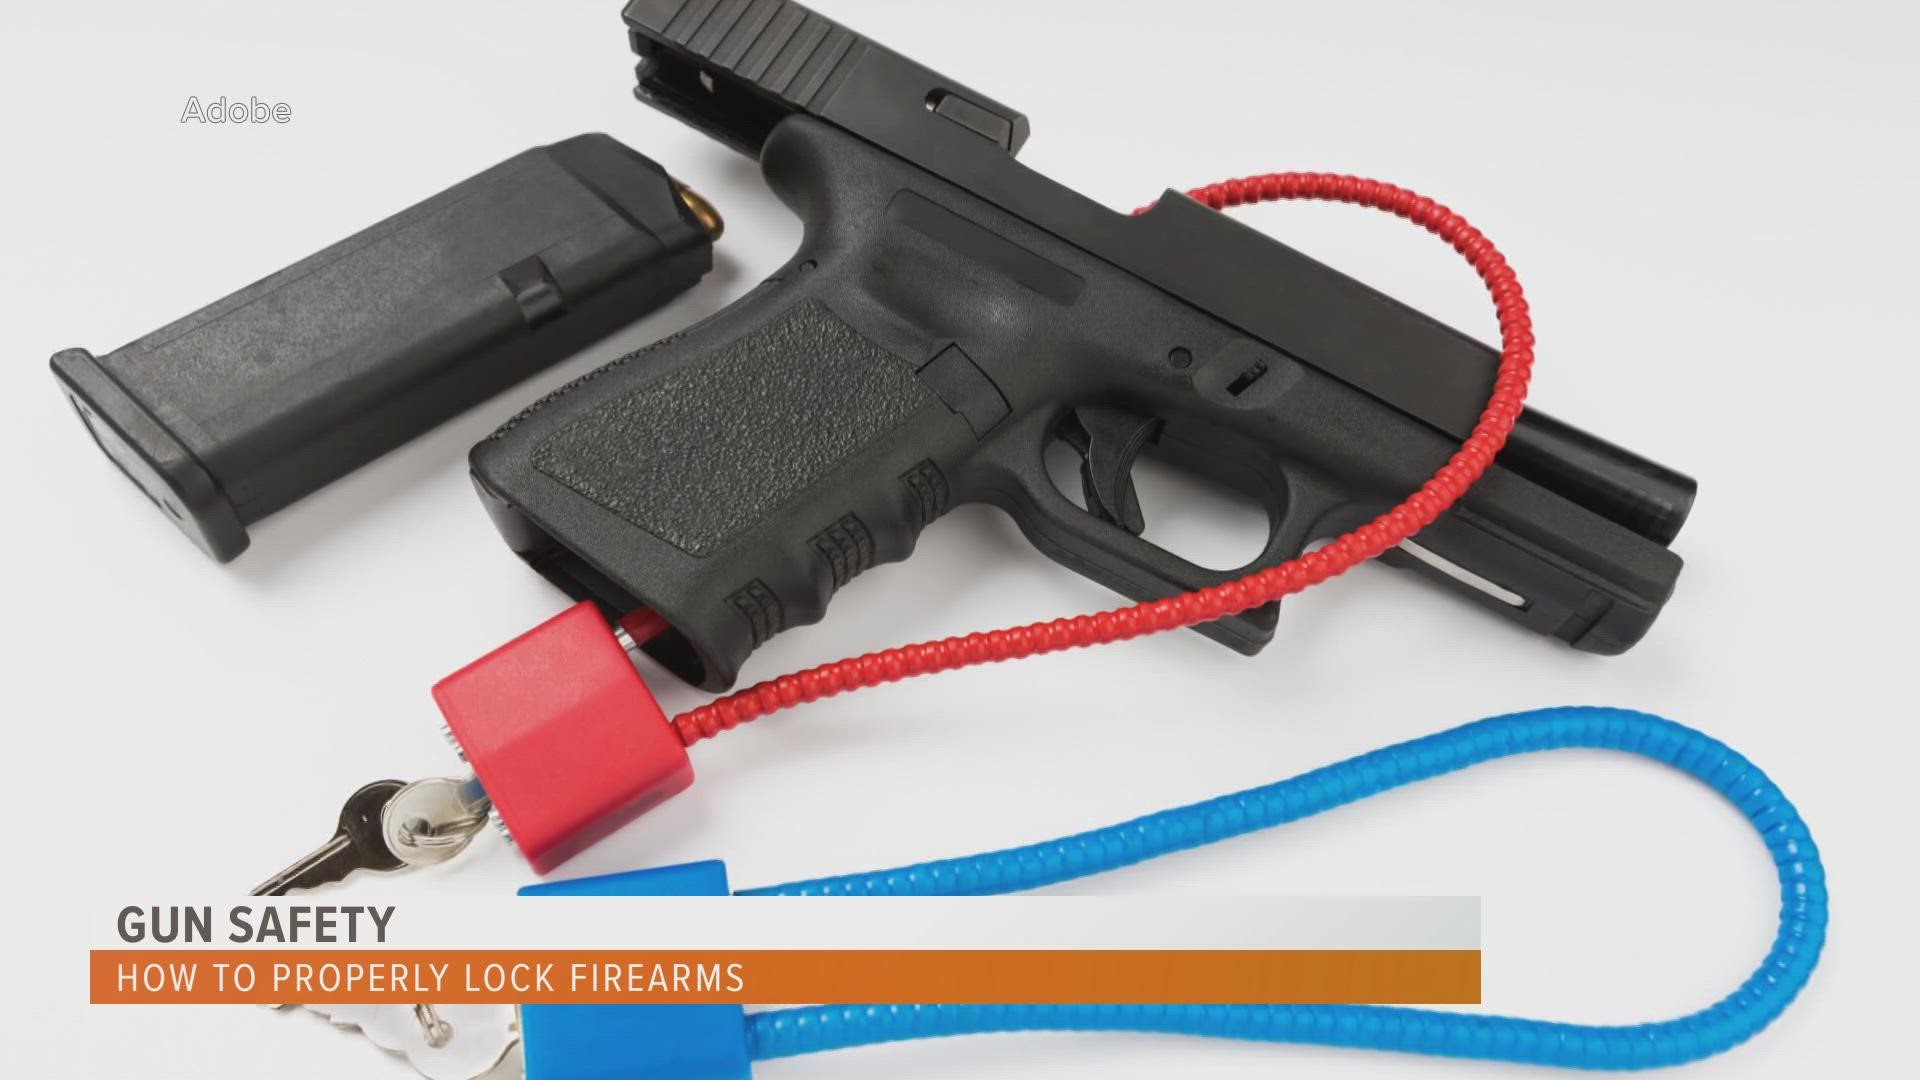 Police say gun locks can keep children from using or playing with them. These locks can be bought at almost any store.